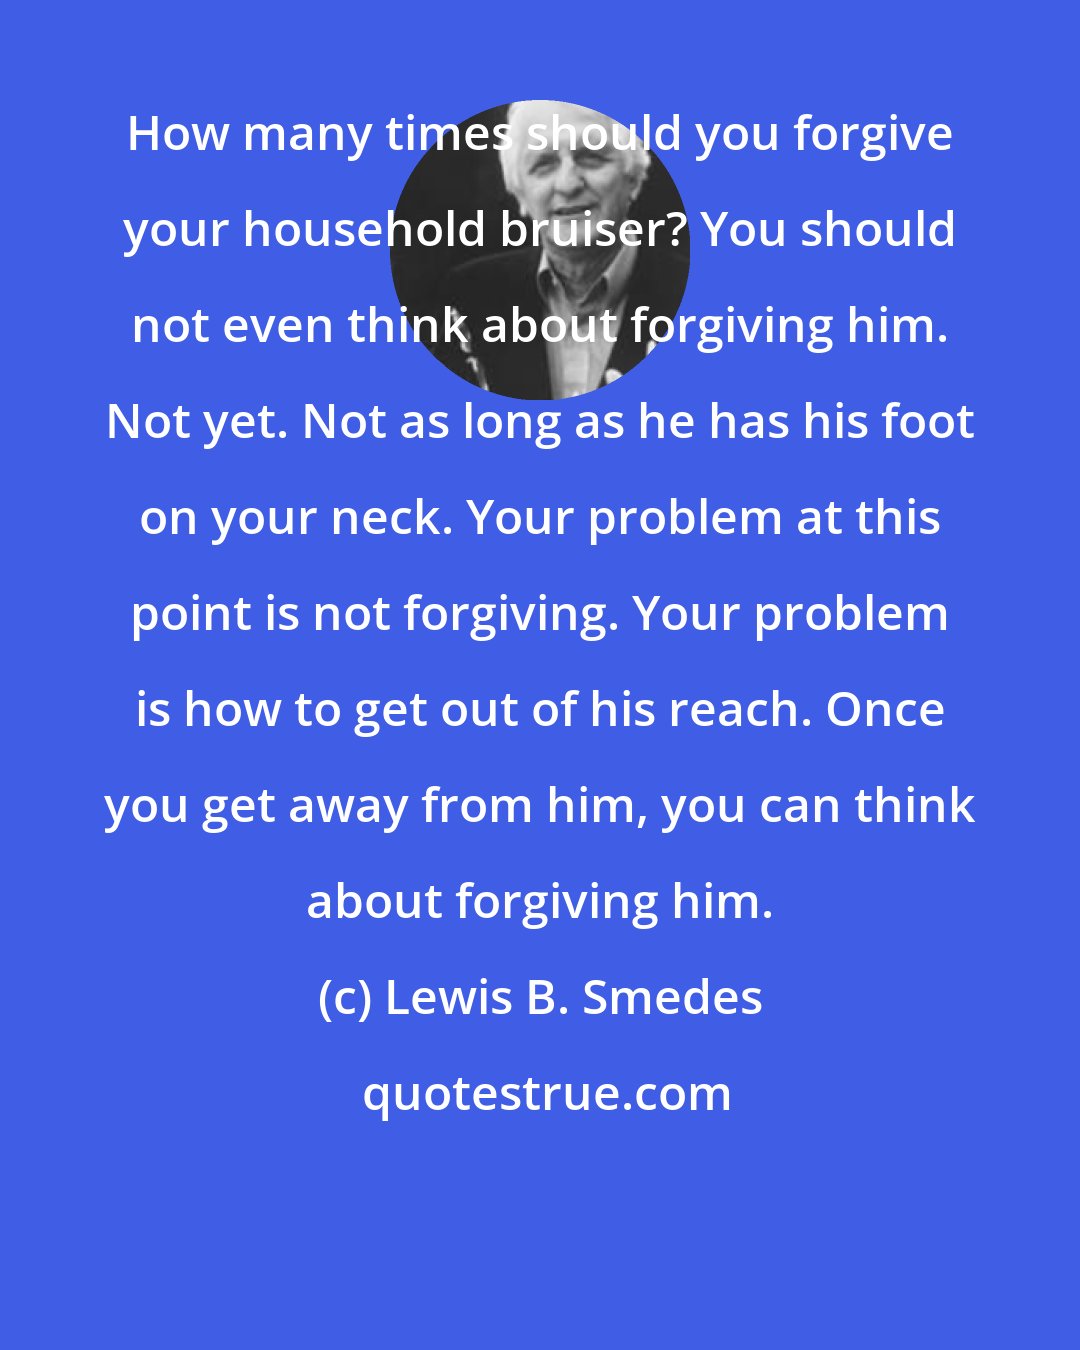 Lewis B. Smedes: How many times should you forgive your household bruiser? You should not even think about forgiving him. Not yet. Not as long as he has his foot on your neck. Your problem at this point is not forgiving. Your problem is how to get out of his reach. Once you get away from him, you can think about forgiving him.